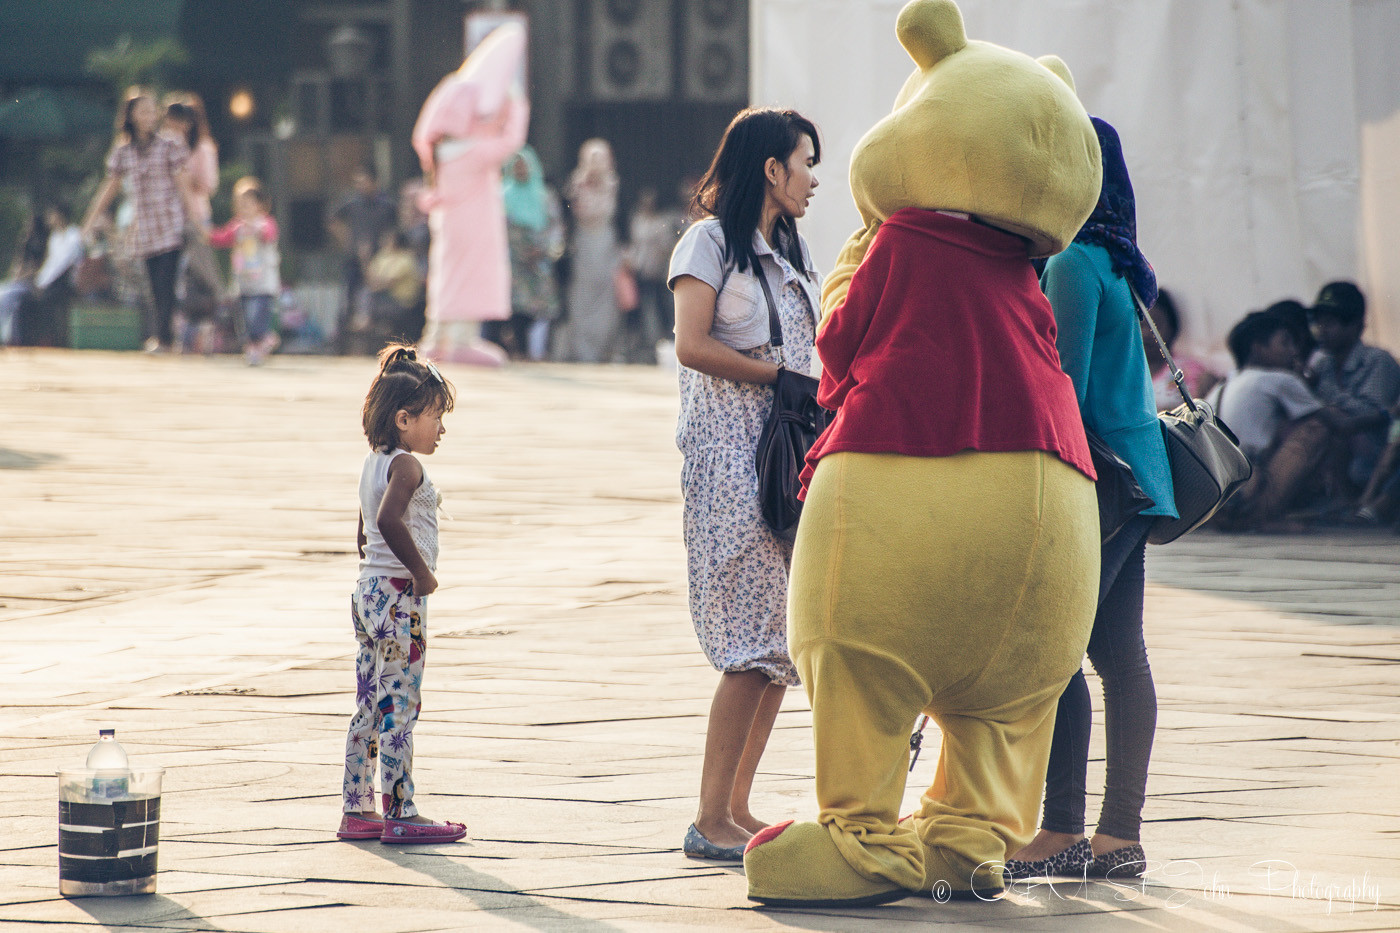 Winnie the Pooh chatting away with the locals in Taman Fatahilah, Old Jakarta 